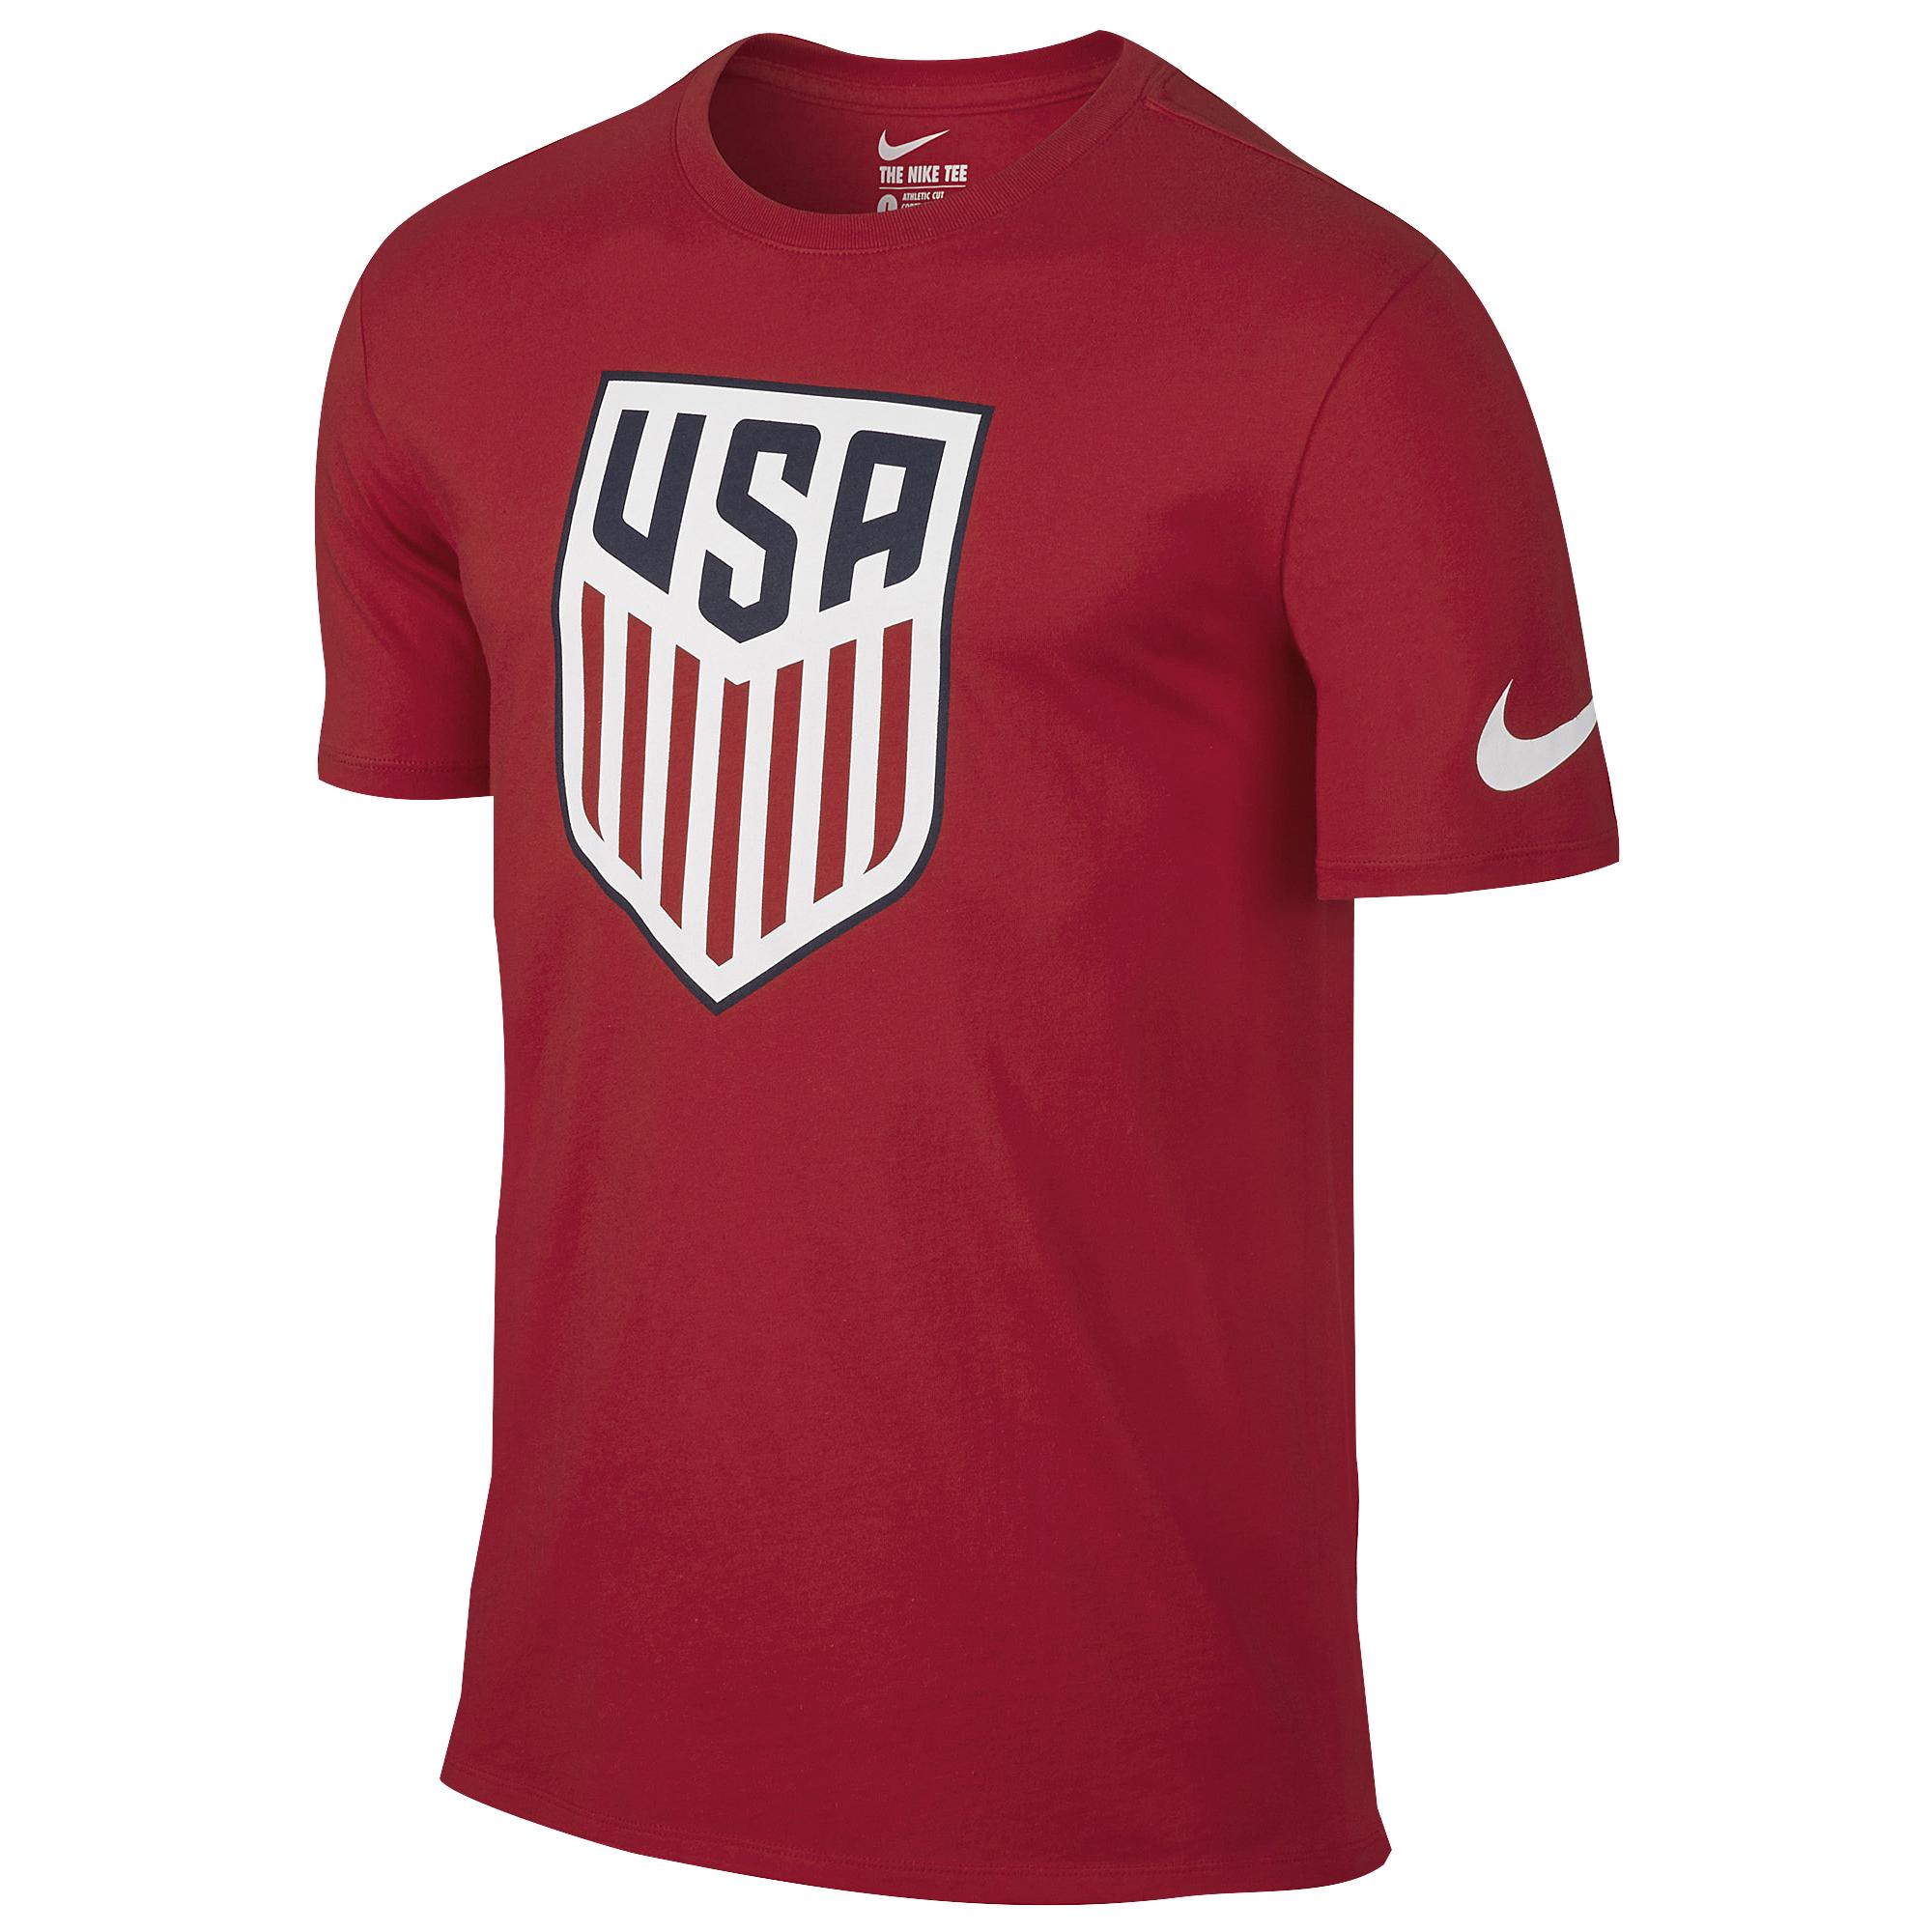 Nike Usa Crest T-shirt in Red for Men - Lyst